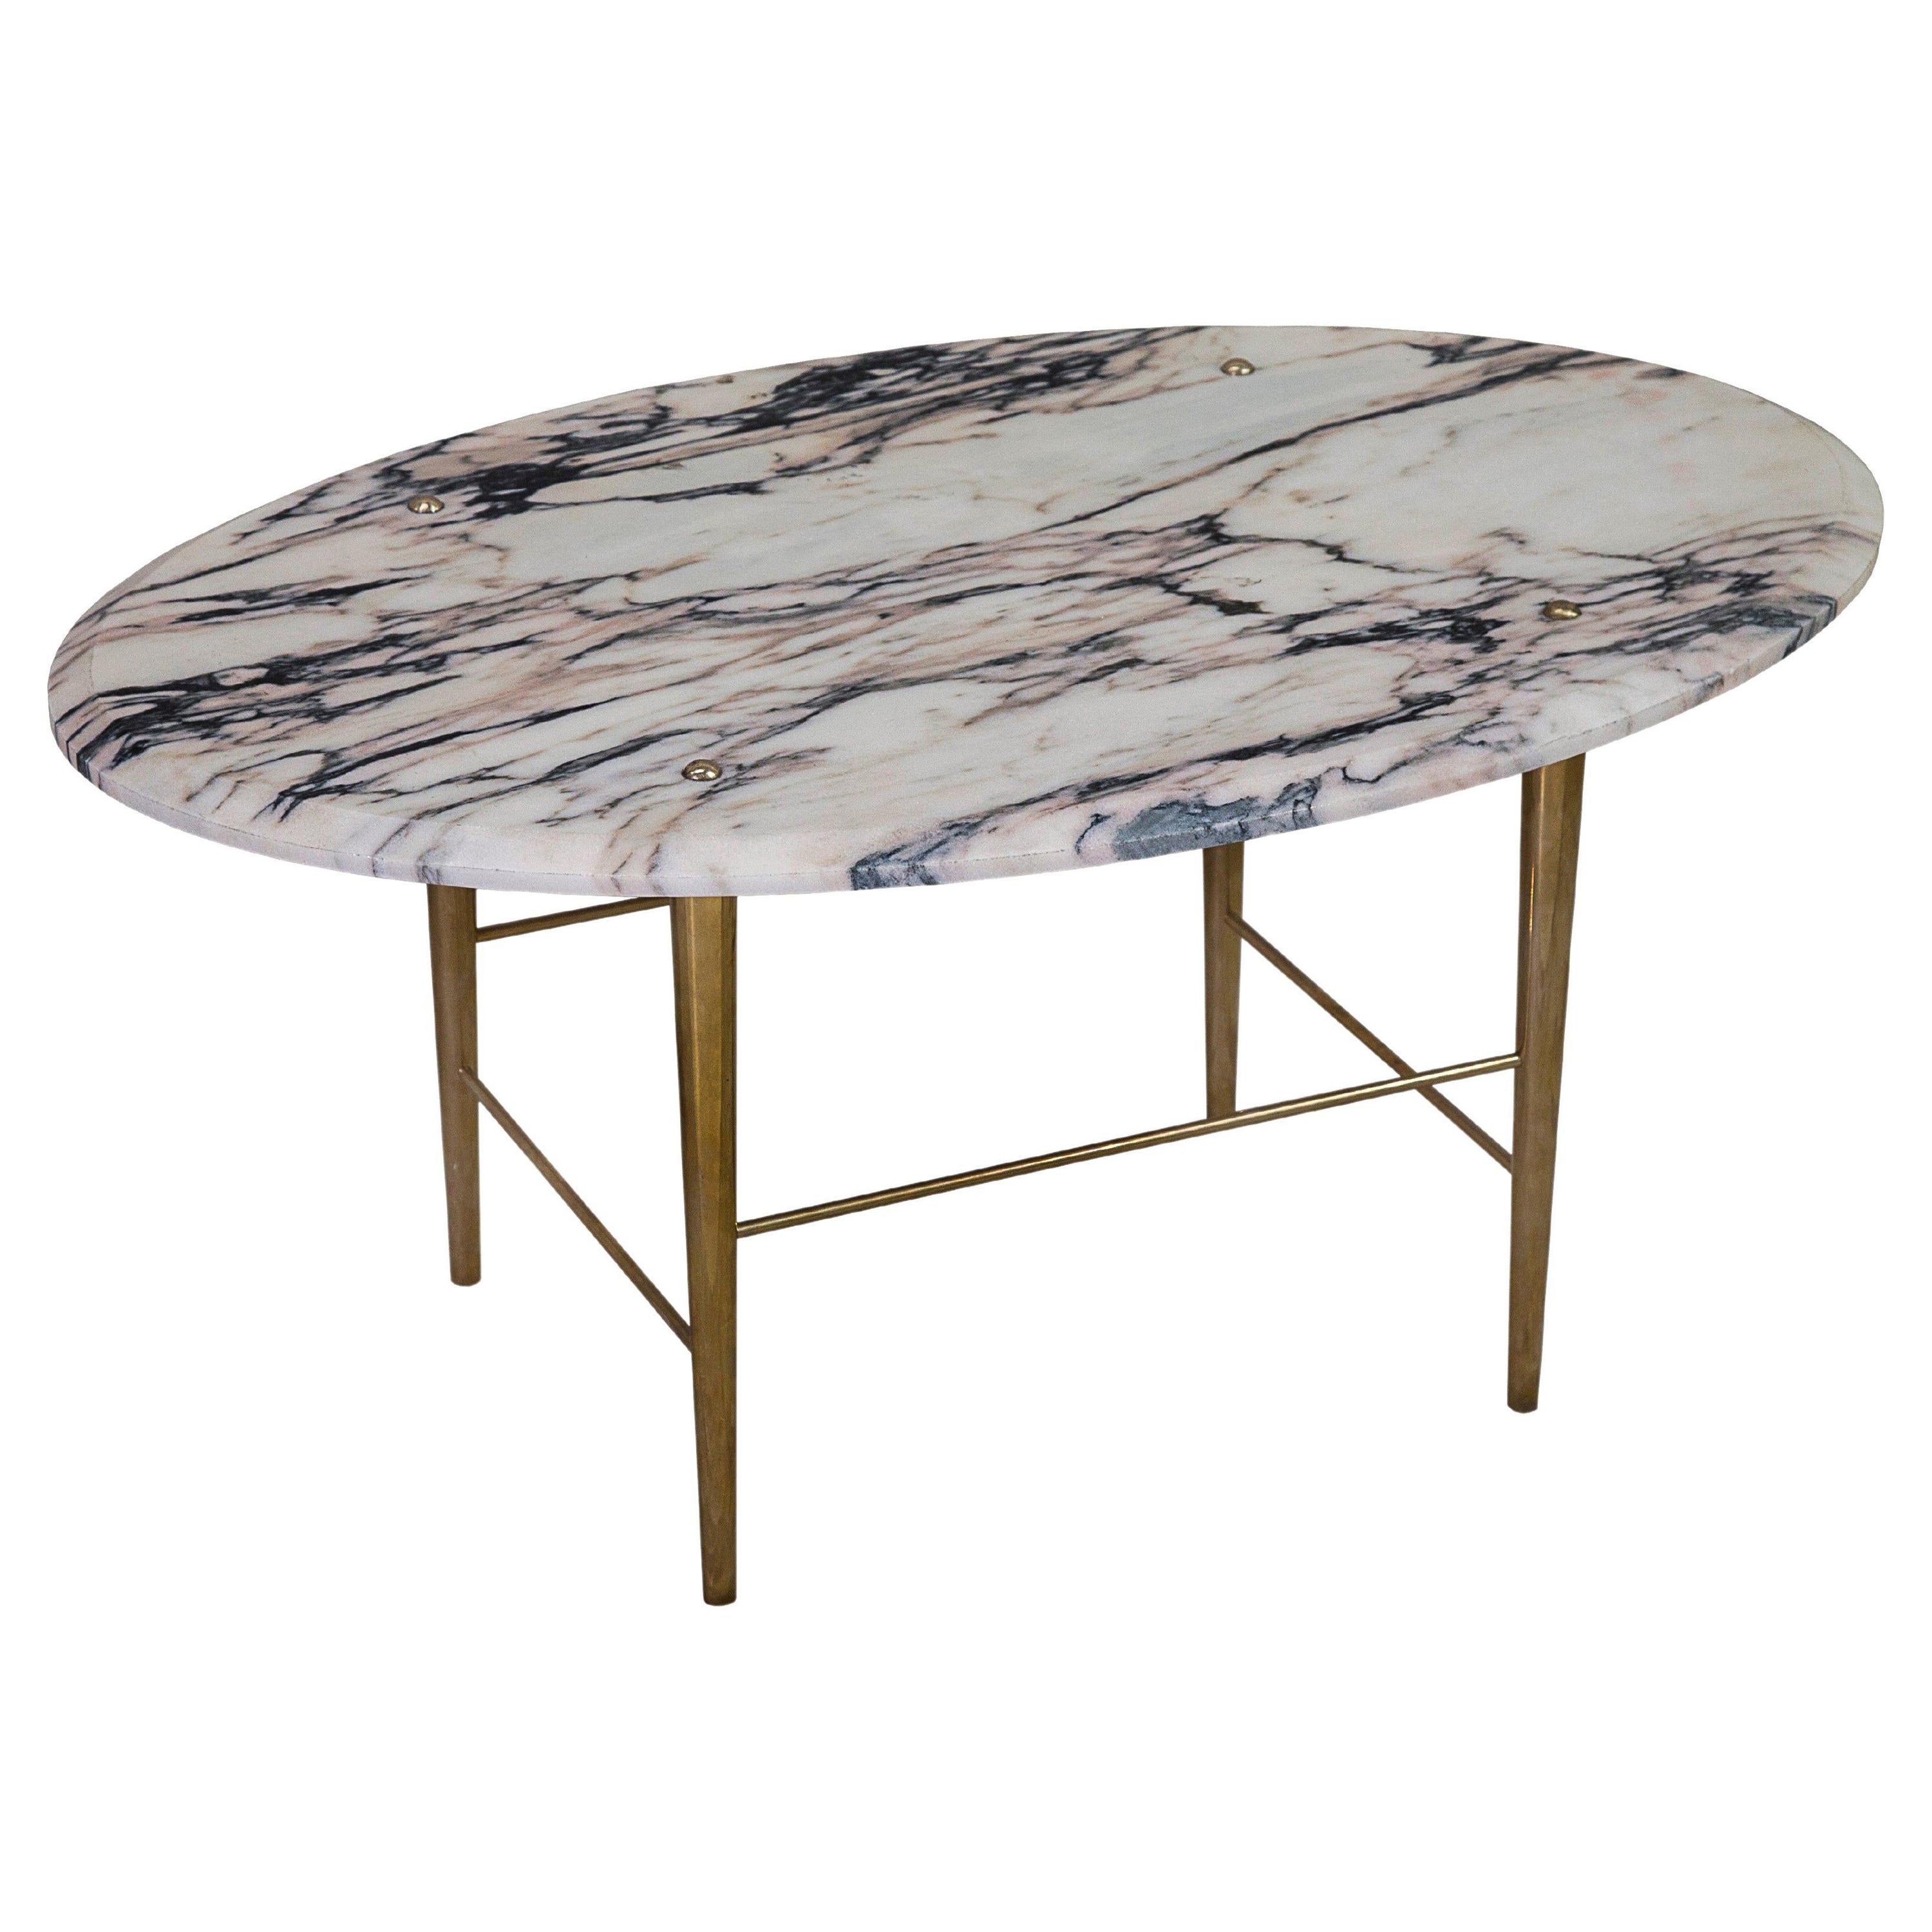 Stud Coffee Table in Vulcanatta Marble and Polished Brass — Medium For Sale